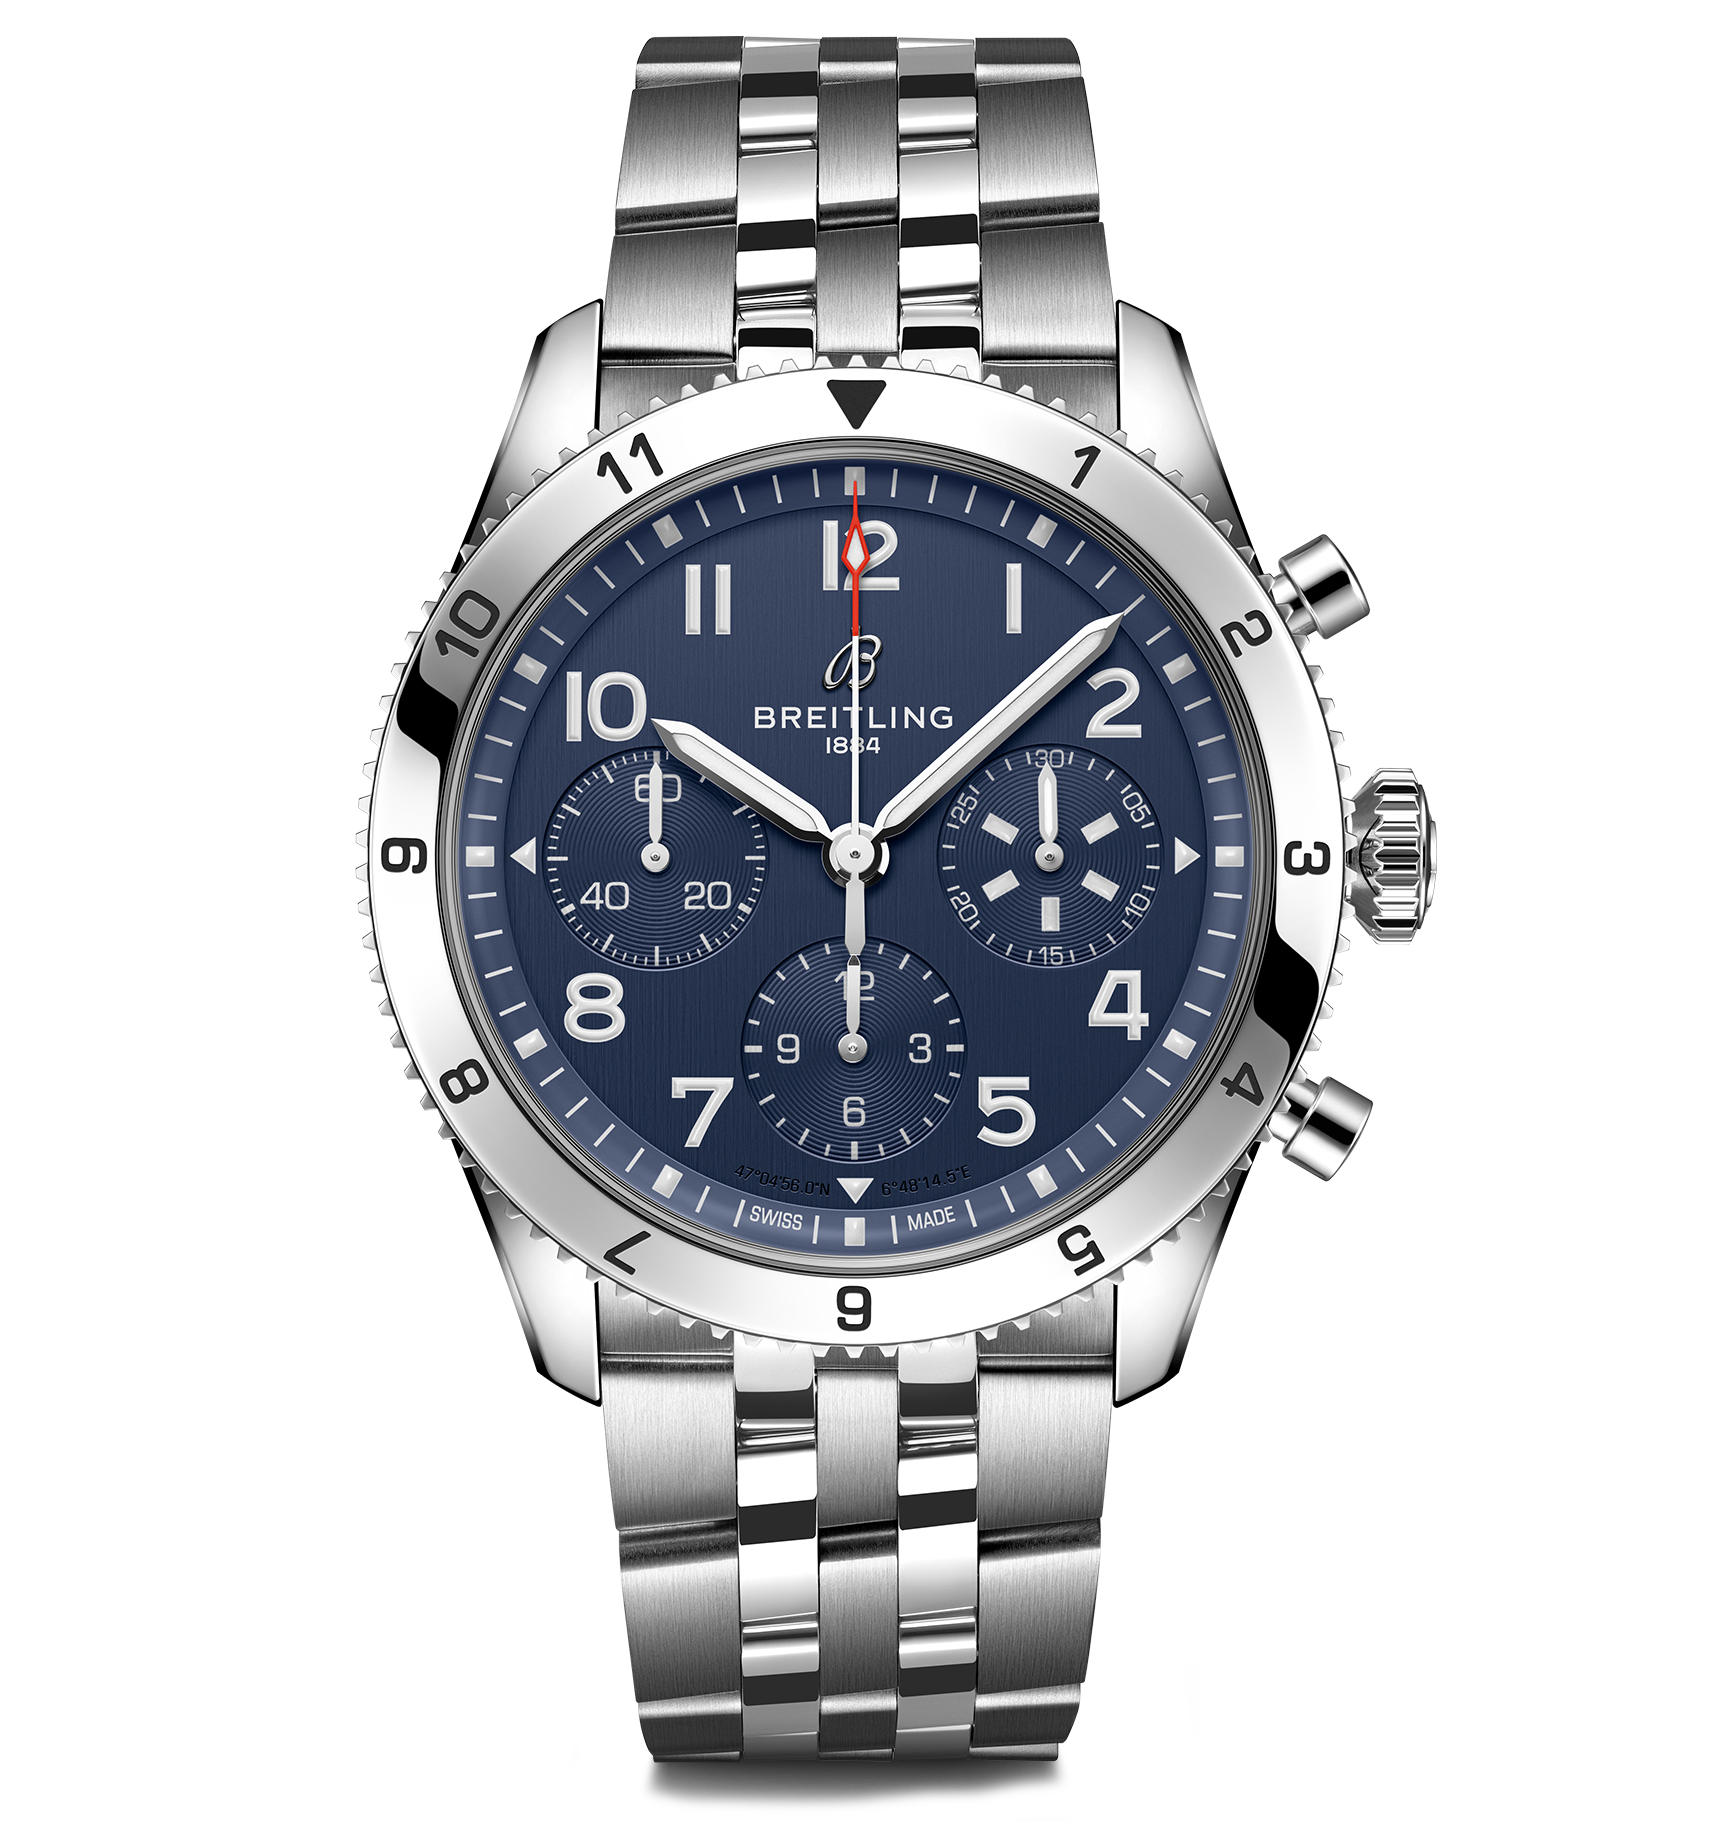 Breitling Classic AVI Chronograph 42 Tribute to Vought F4U Corsair Watch with Blue Dial